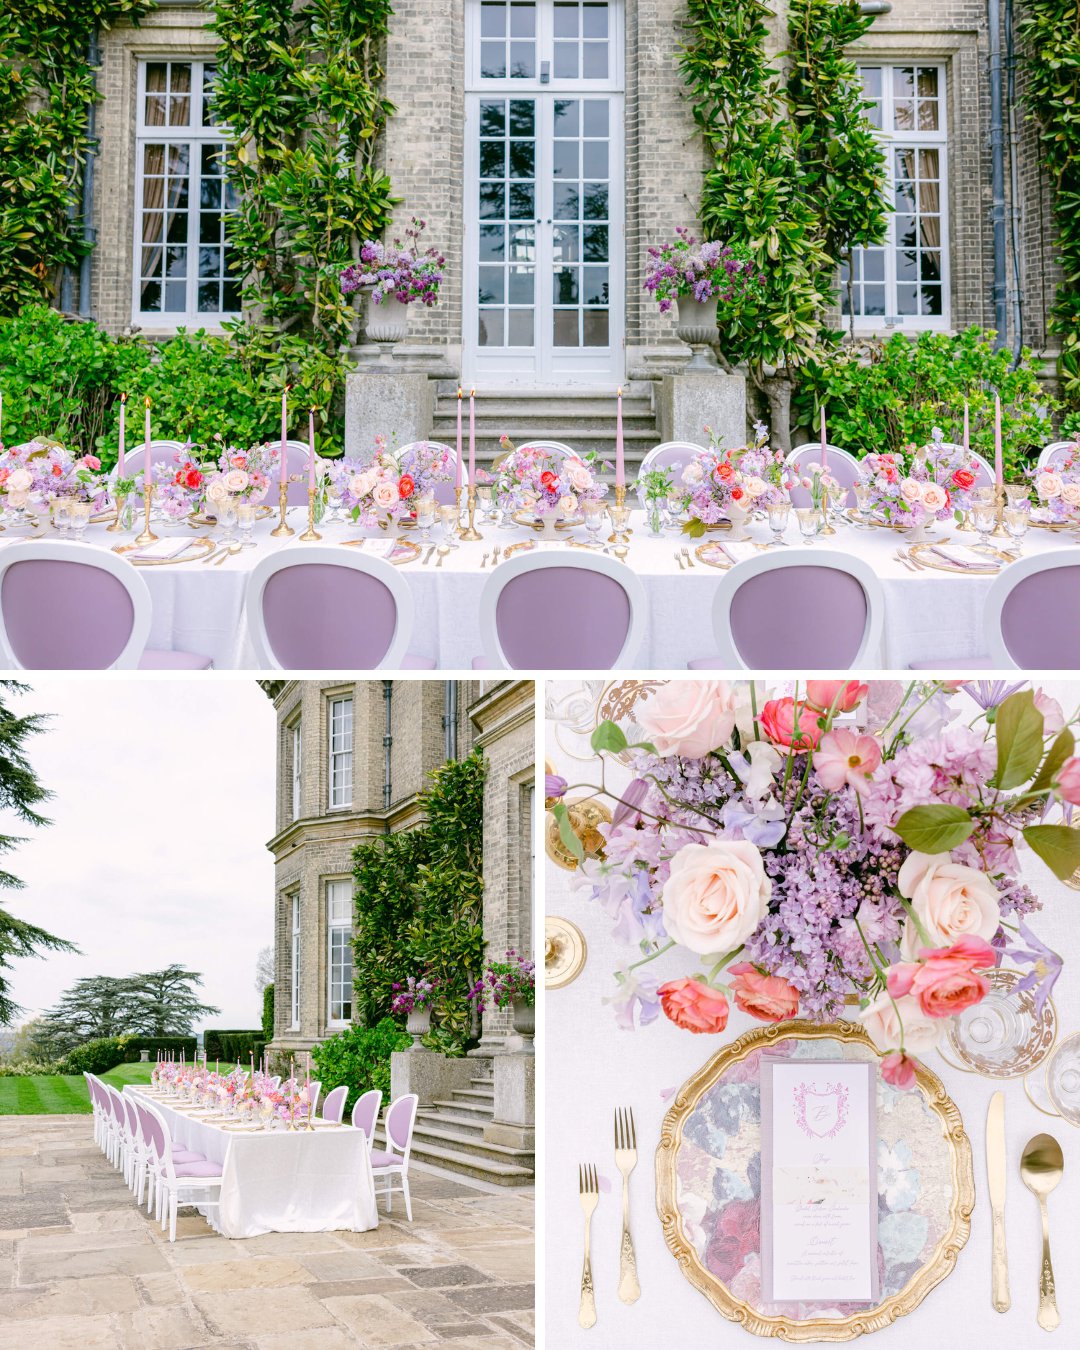 Collage of wedding reception featuring long table set up for a wedding ceremony in pastel and lilac colors on the terrace of an English manor